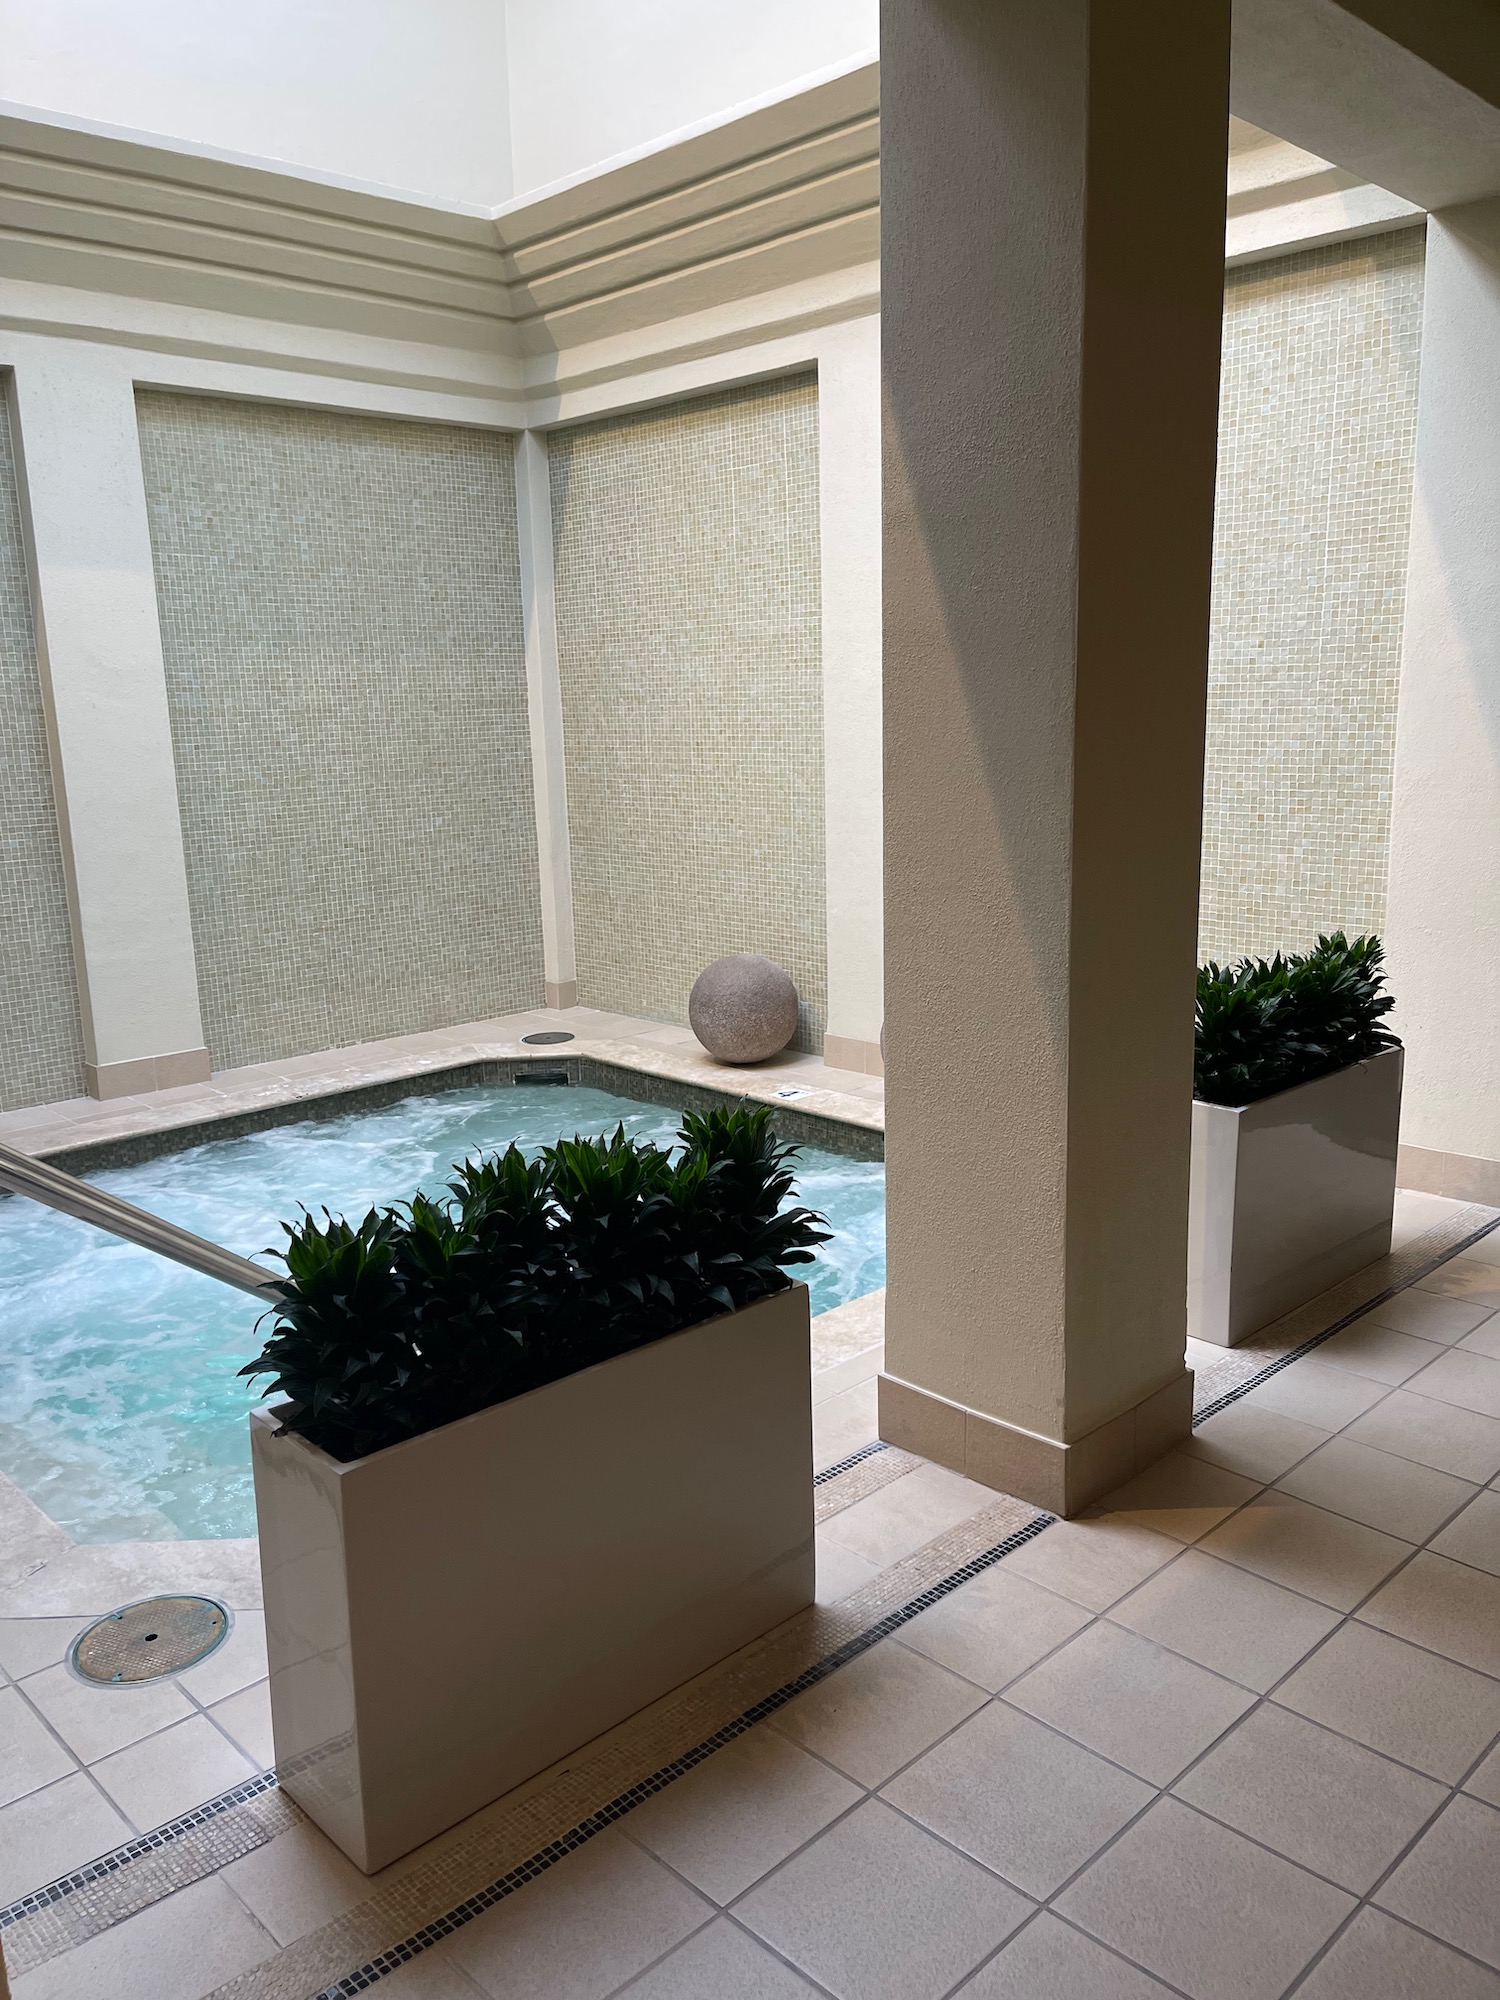 a indoor hot tub with a stone ball and plants